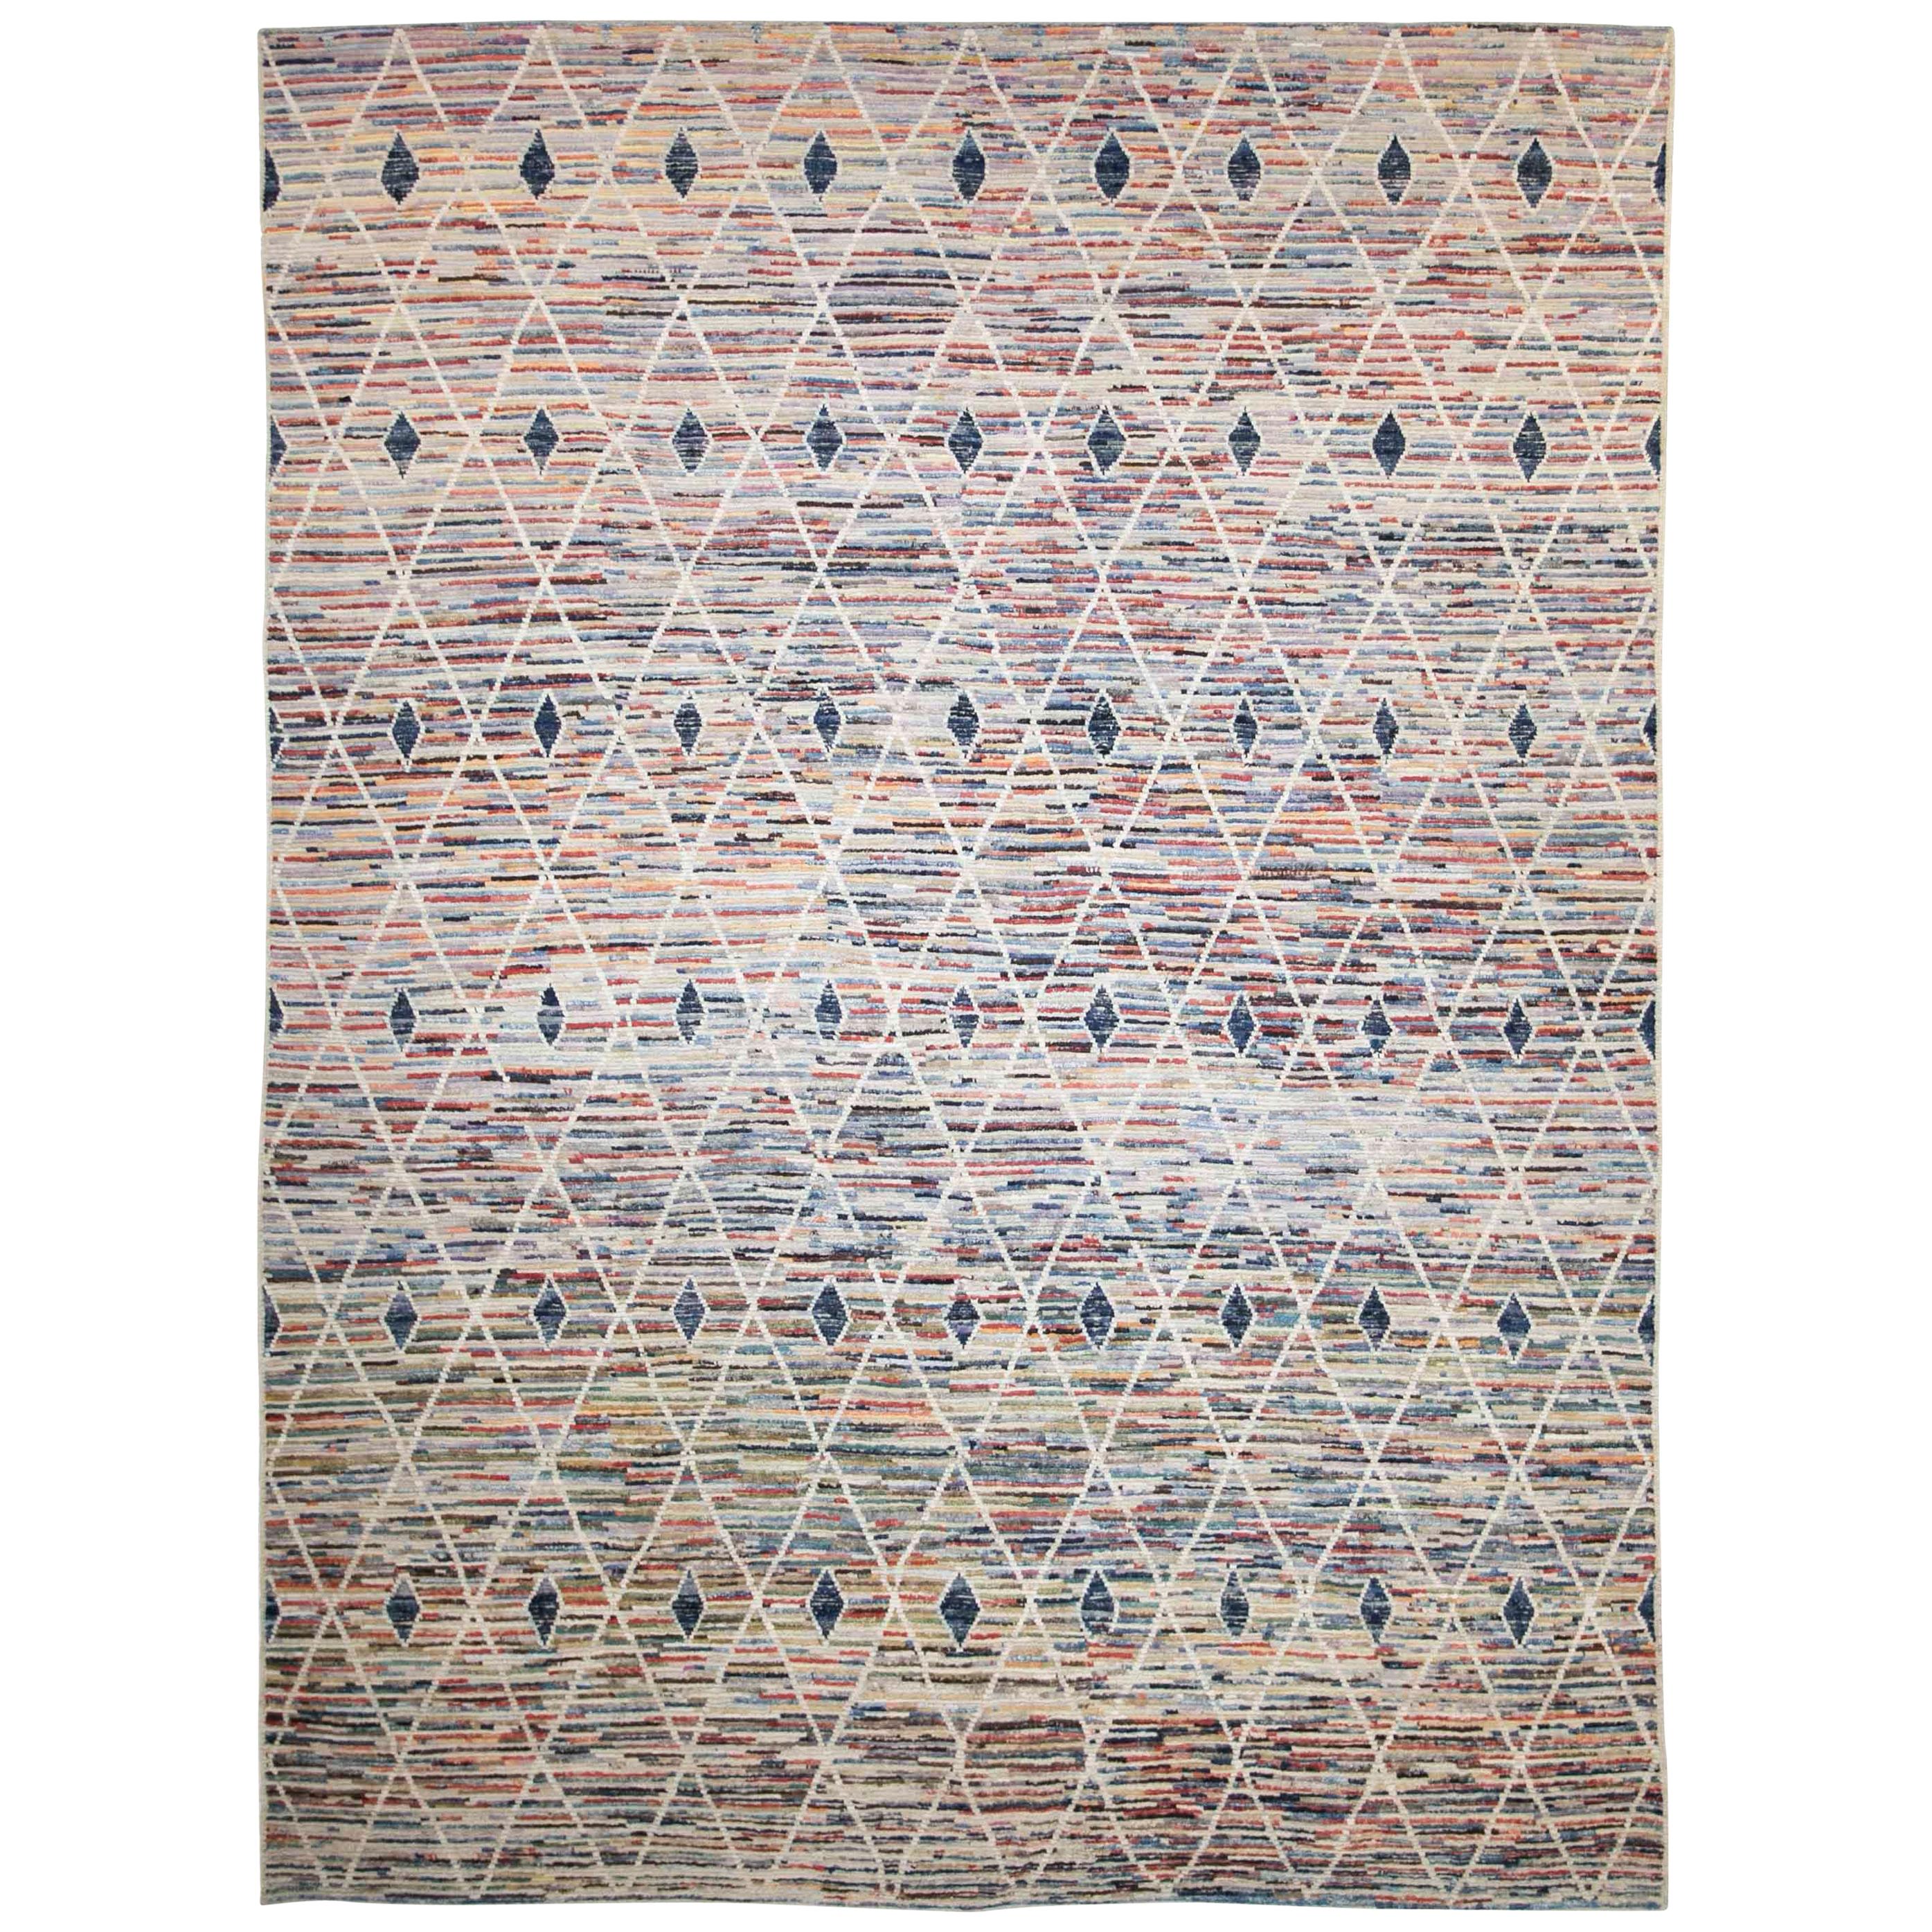 Afghan Moroccan Style Rug with White/Blue Diamonds on Colored Field